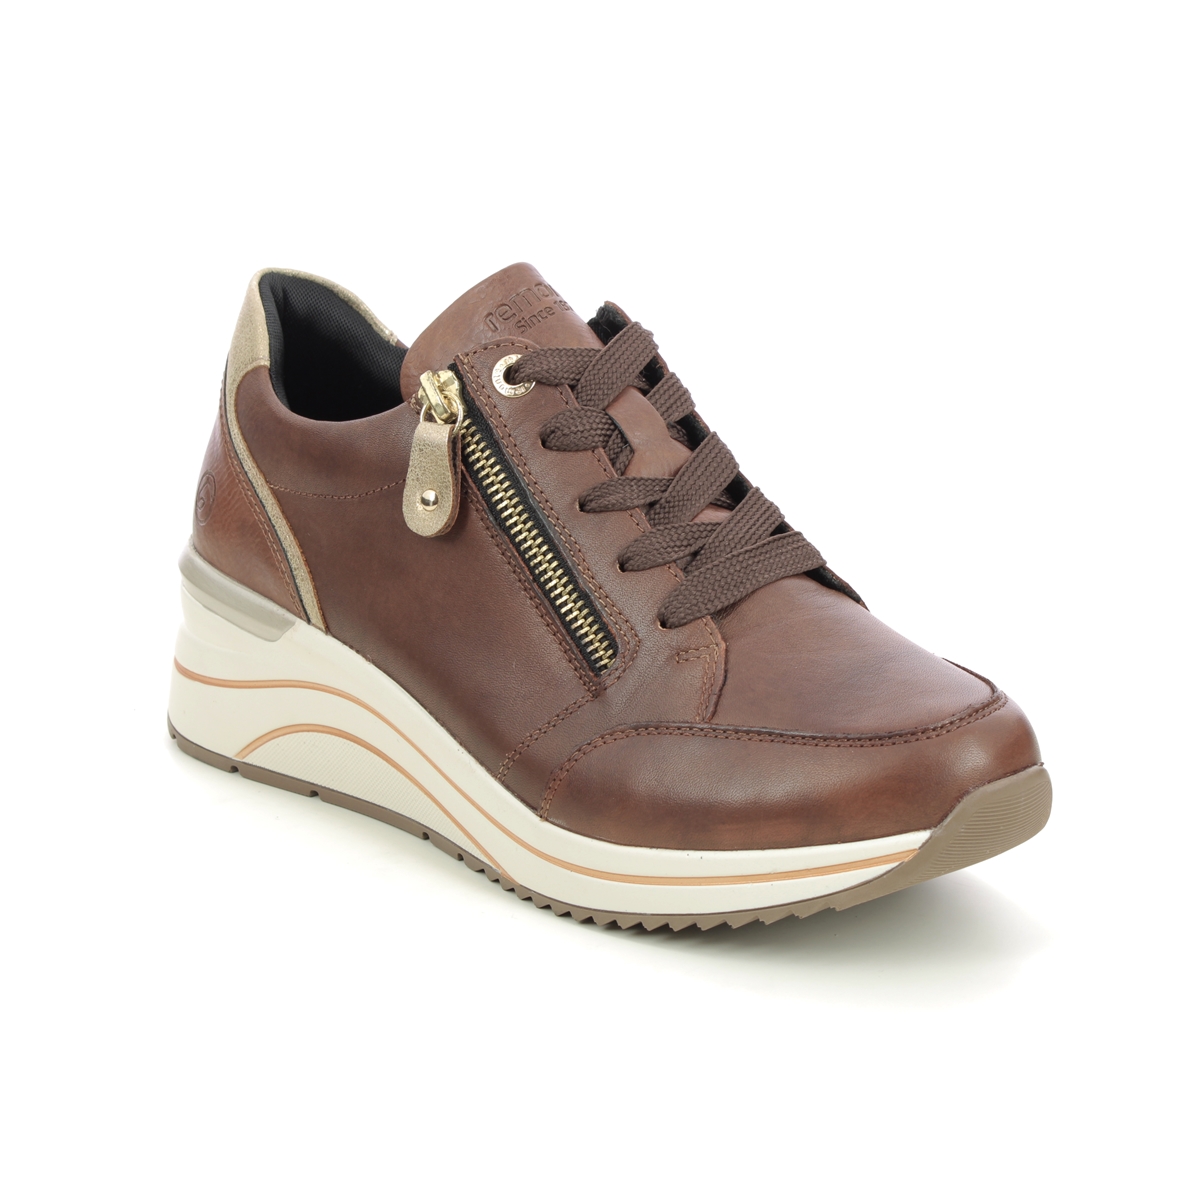 Remonte Ranzip Wedge Tan Leather Womens Trainers D0T03-22 In Size 39 In Plain Tan Leather